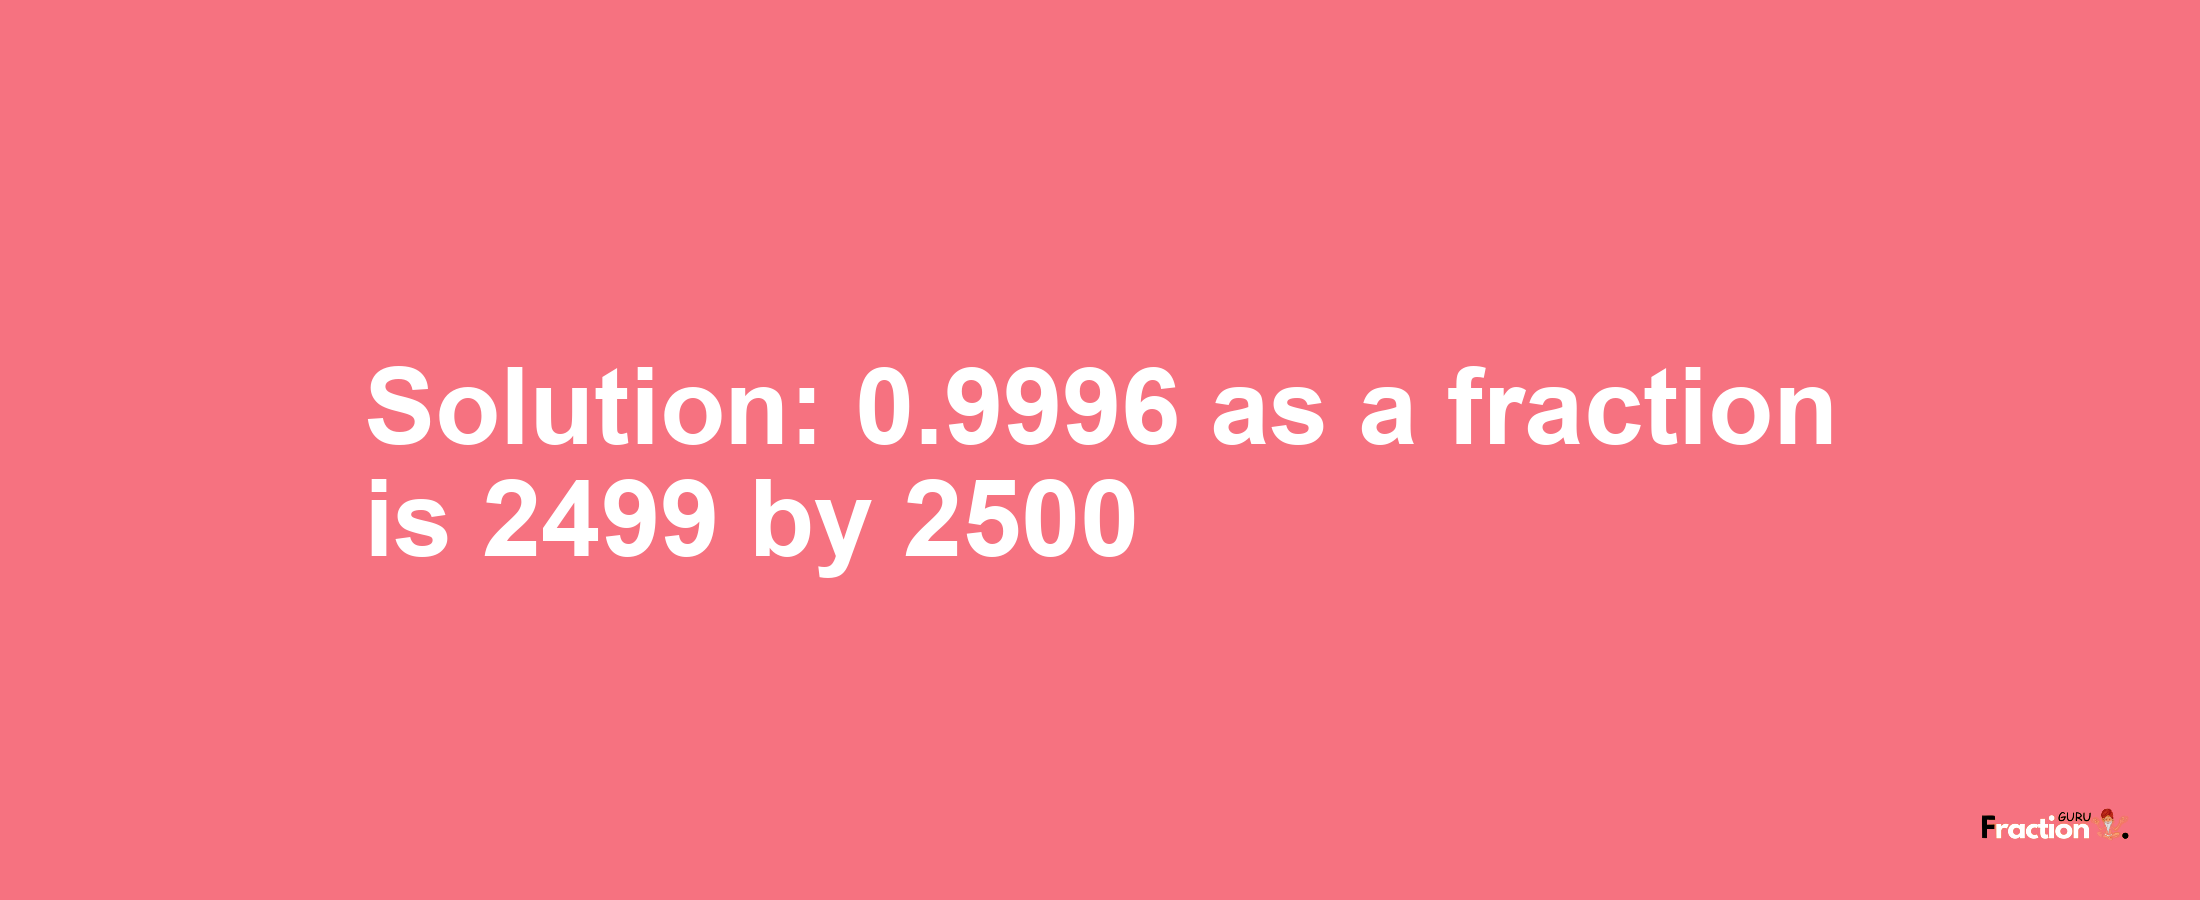 Solution:0.9996 as a fraction is 2499/2500